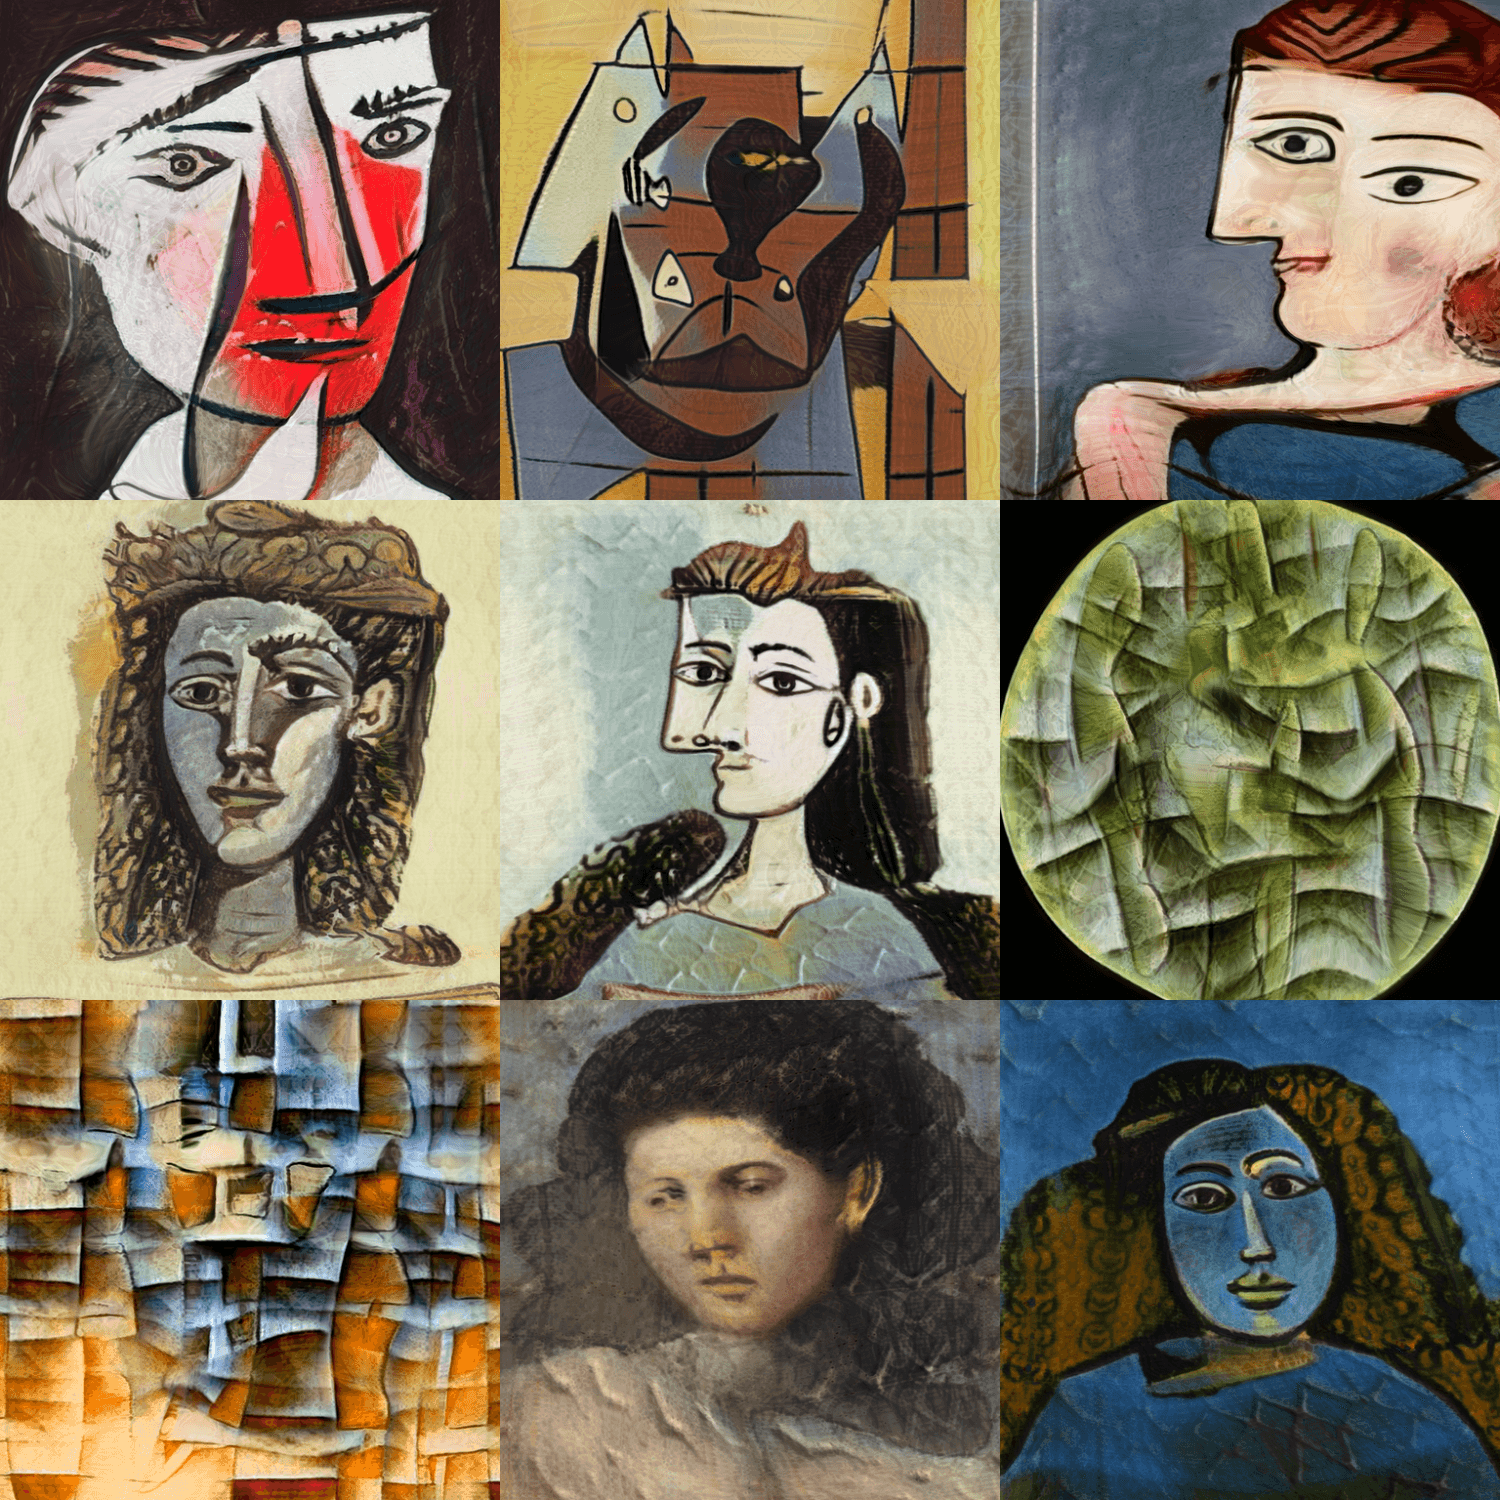 thepicassoproject - Pablo Picasso. Reborn as a Neural Network.